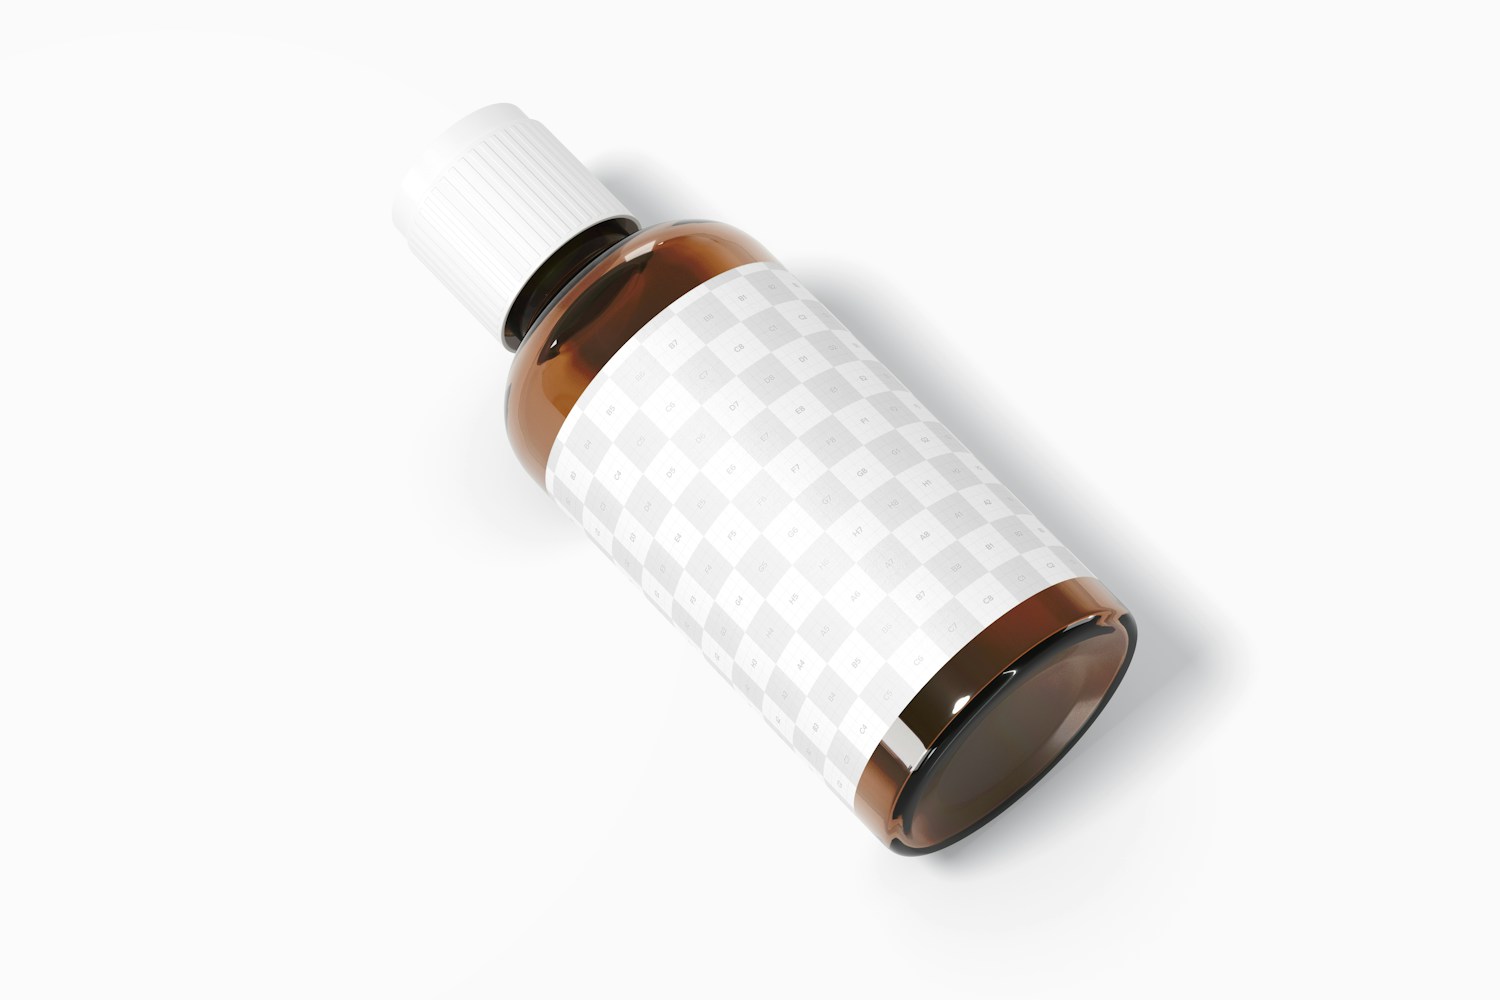 Euro Dropper Bottle with Orifice Reducers Mockup, Top View